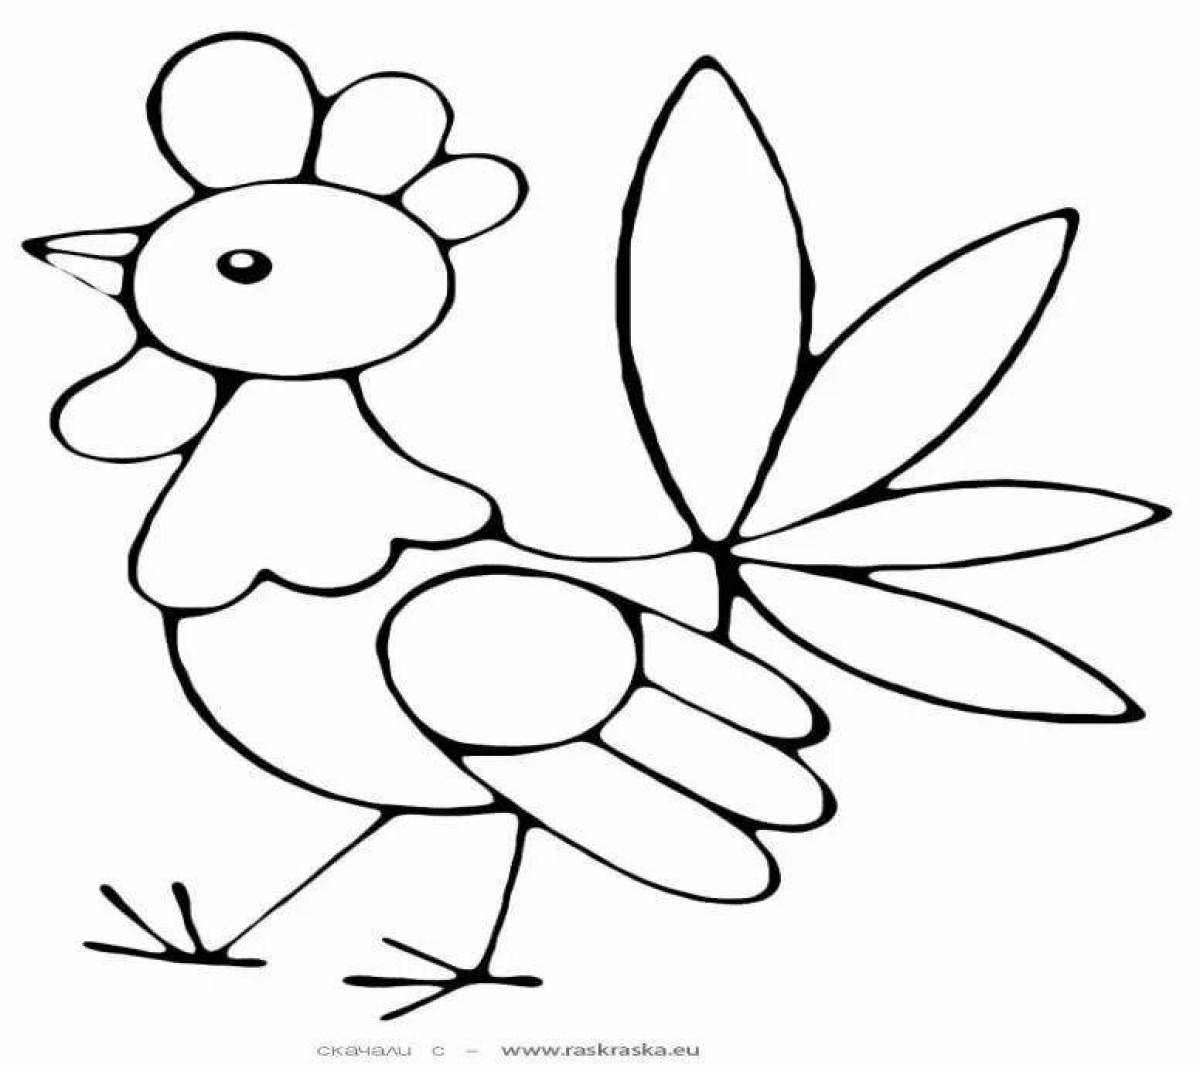 Colorful-delight coloring page 2 младшая группа